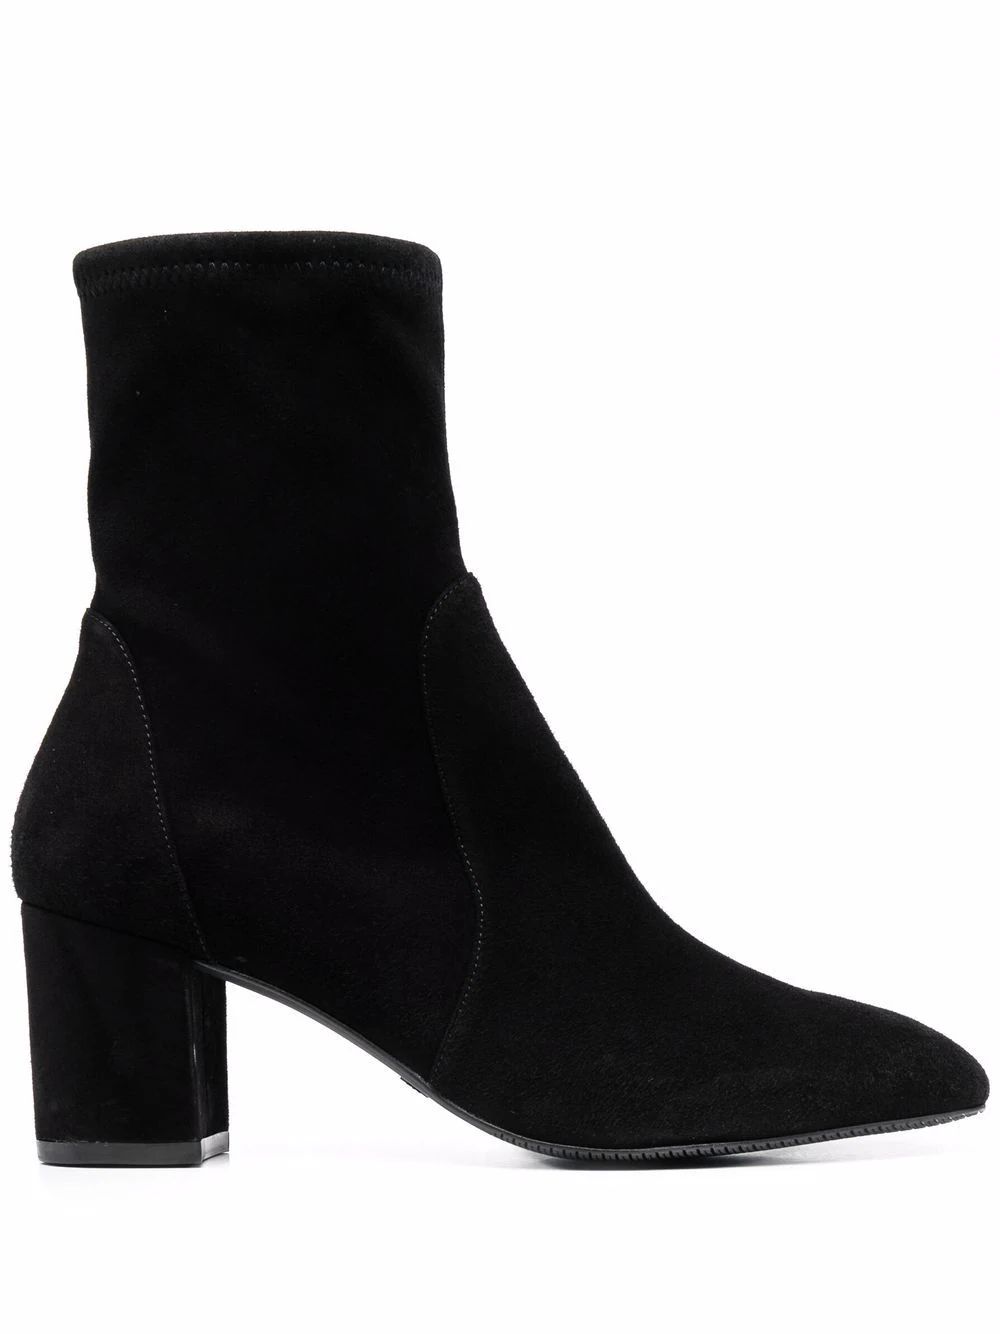 sock-style suede boots | Farfetch Global